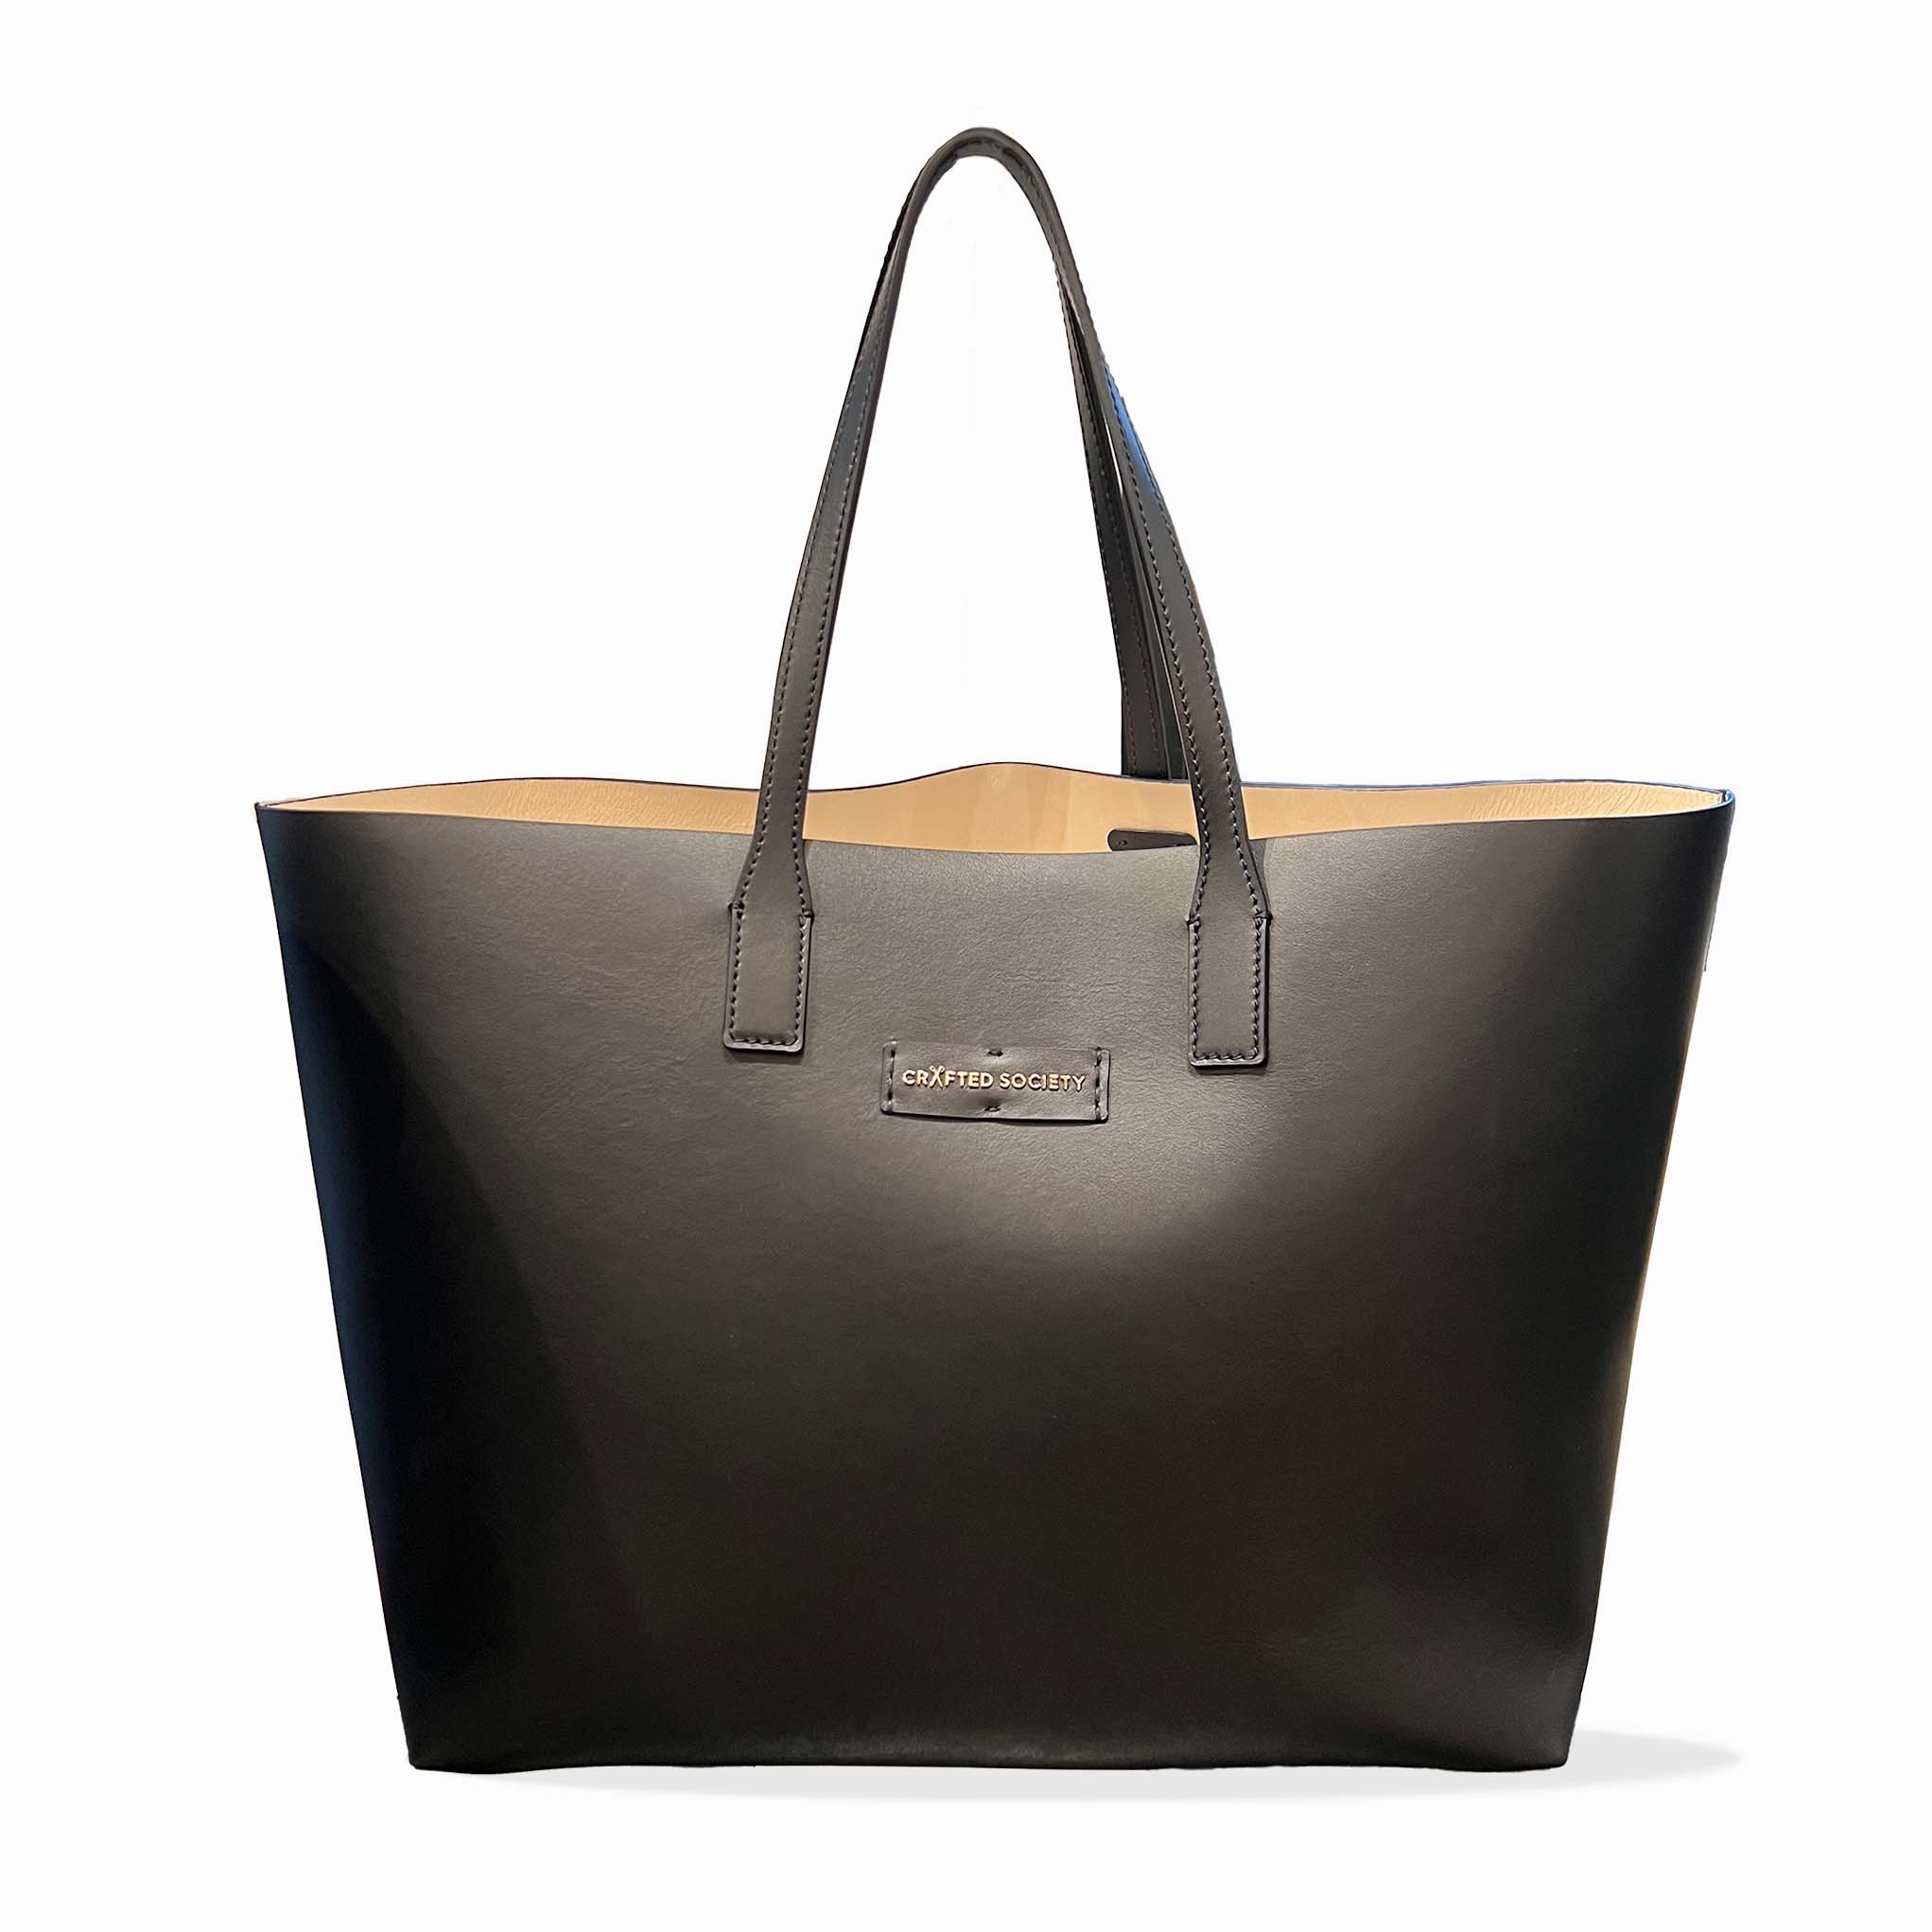 shopper tote bag handcrafted in Italy full grain italian leather in black by crafted society